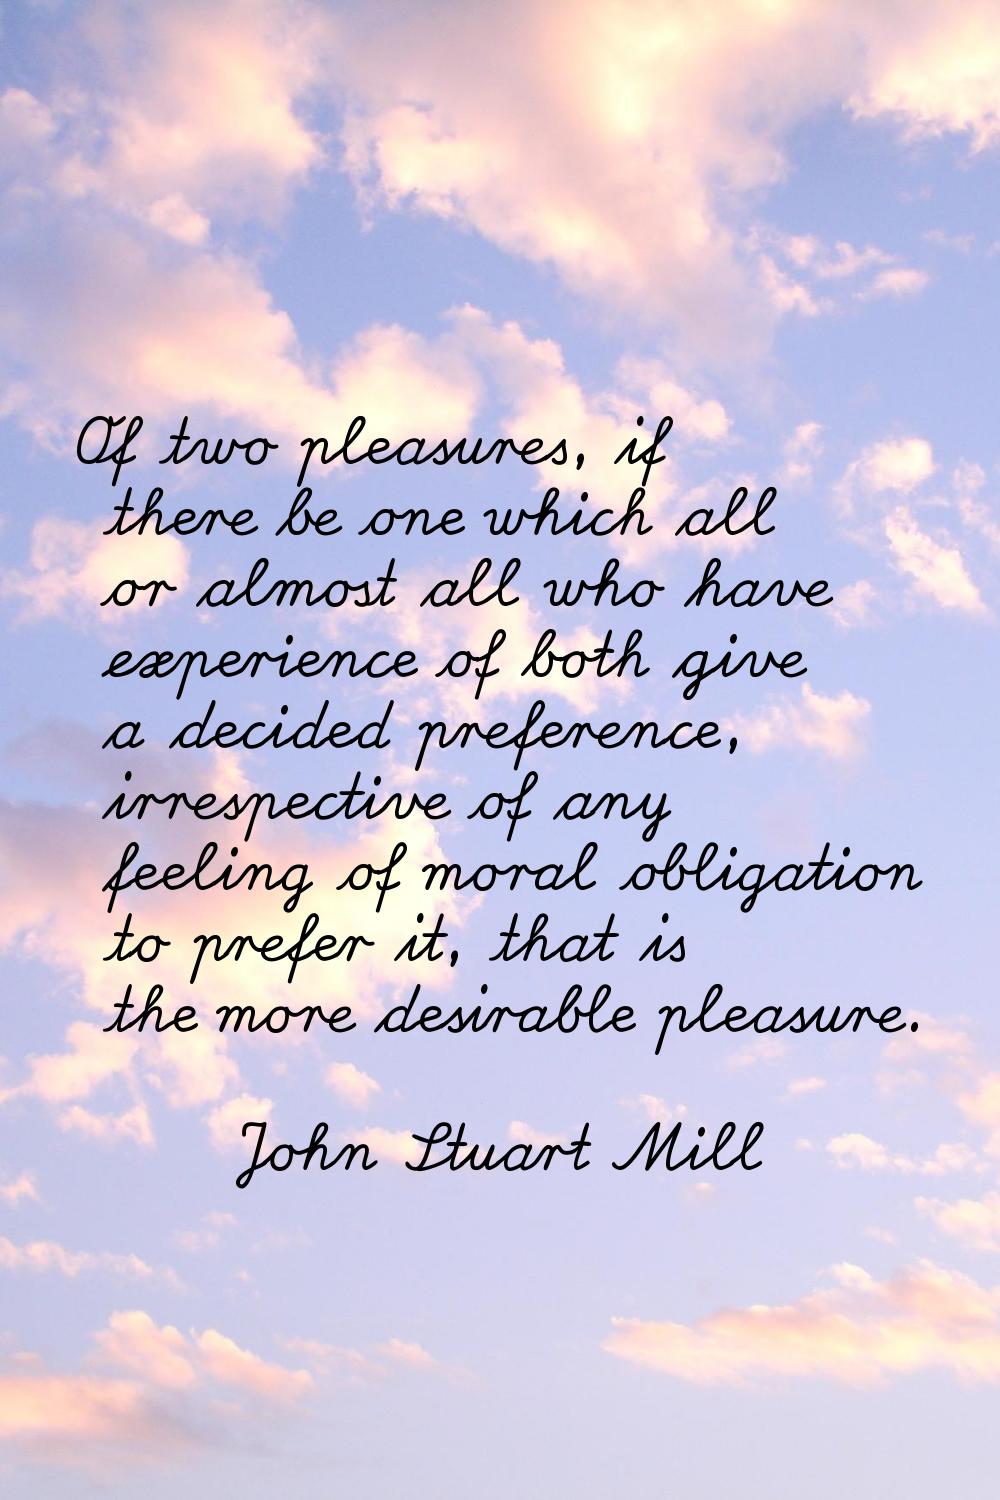 Of two pleasures, if there be one which all or almost all who have experience of both give a decide